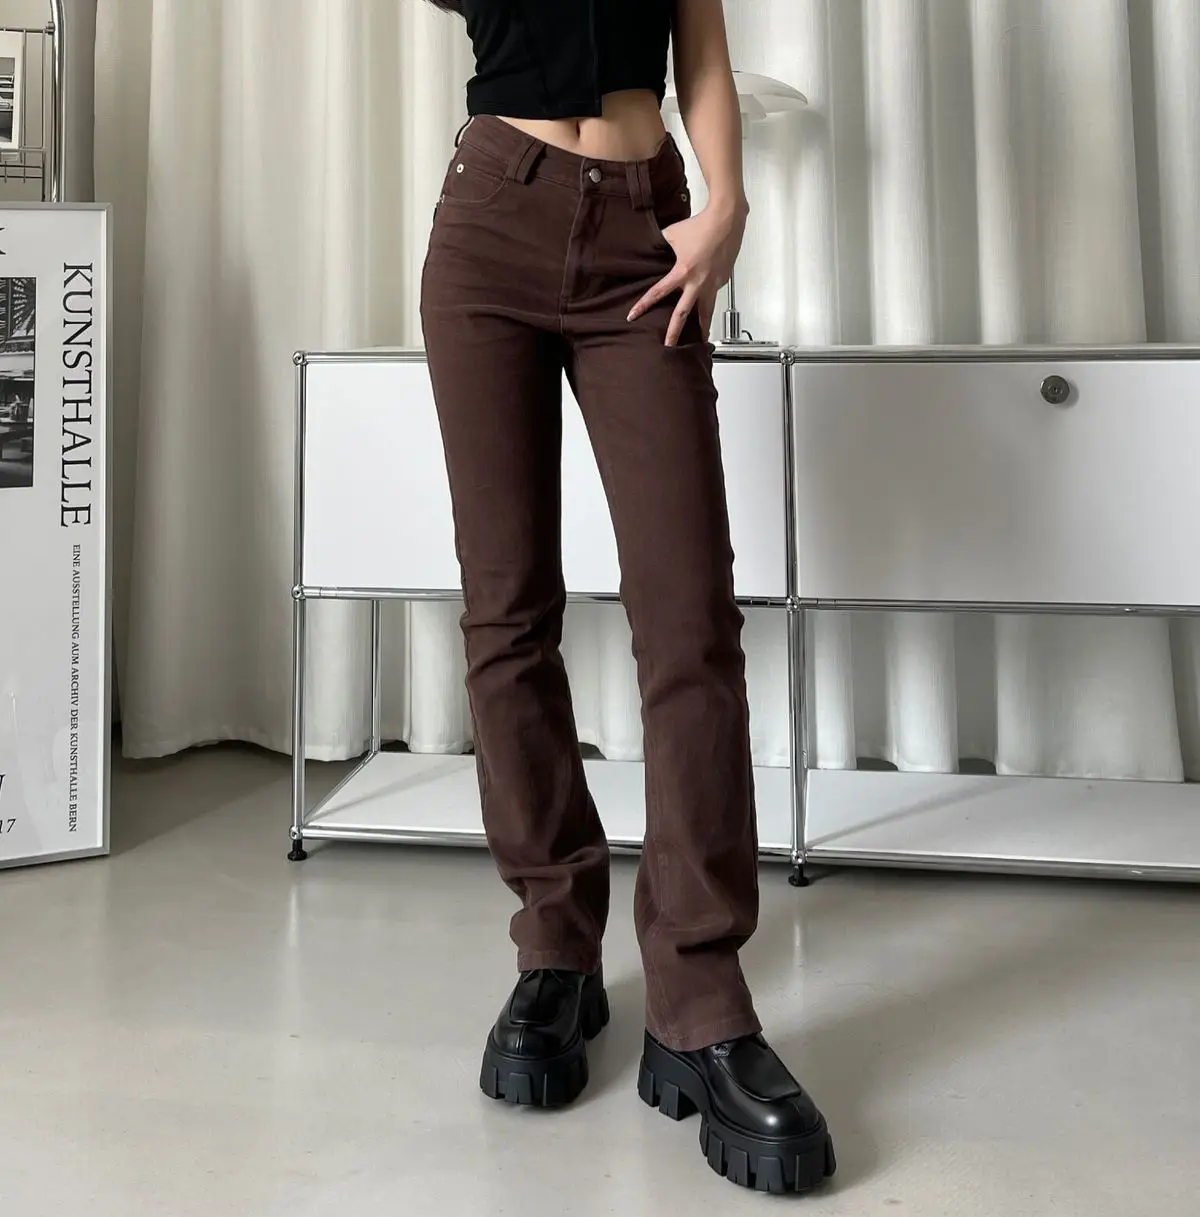 

High-Waisted Thin Hot Girl Brown Jeans Women's Weird Loose Wide-Leg Pants Retro Large Size Hip Flared Pants Trousers